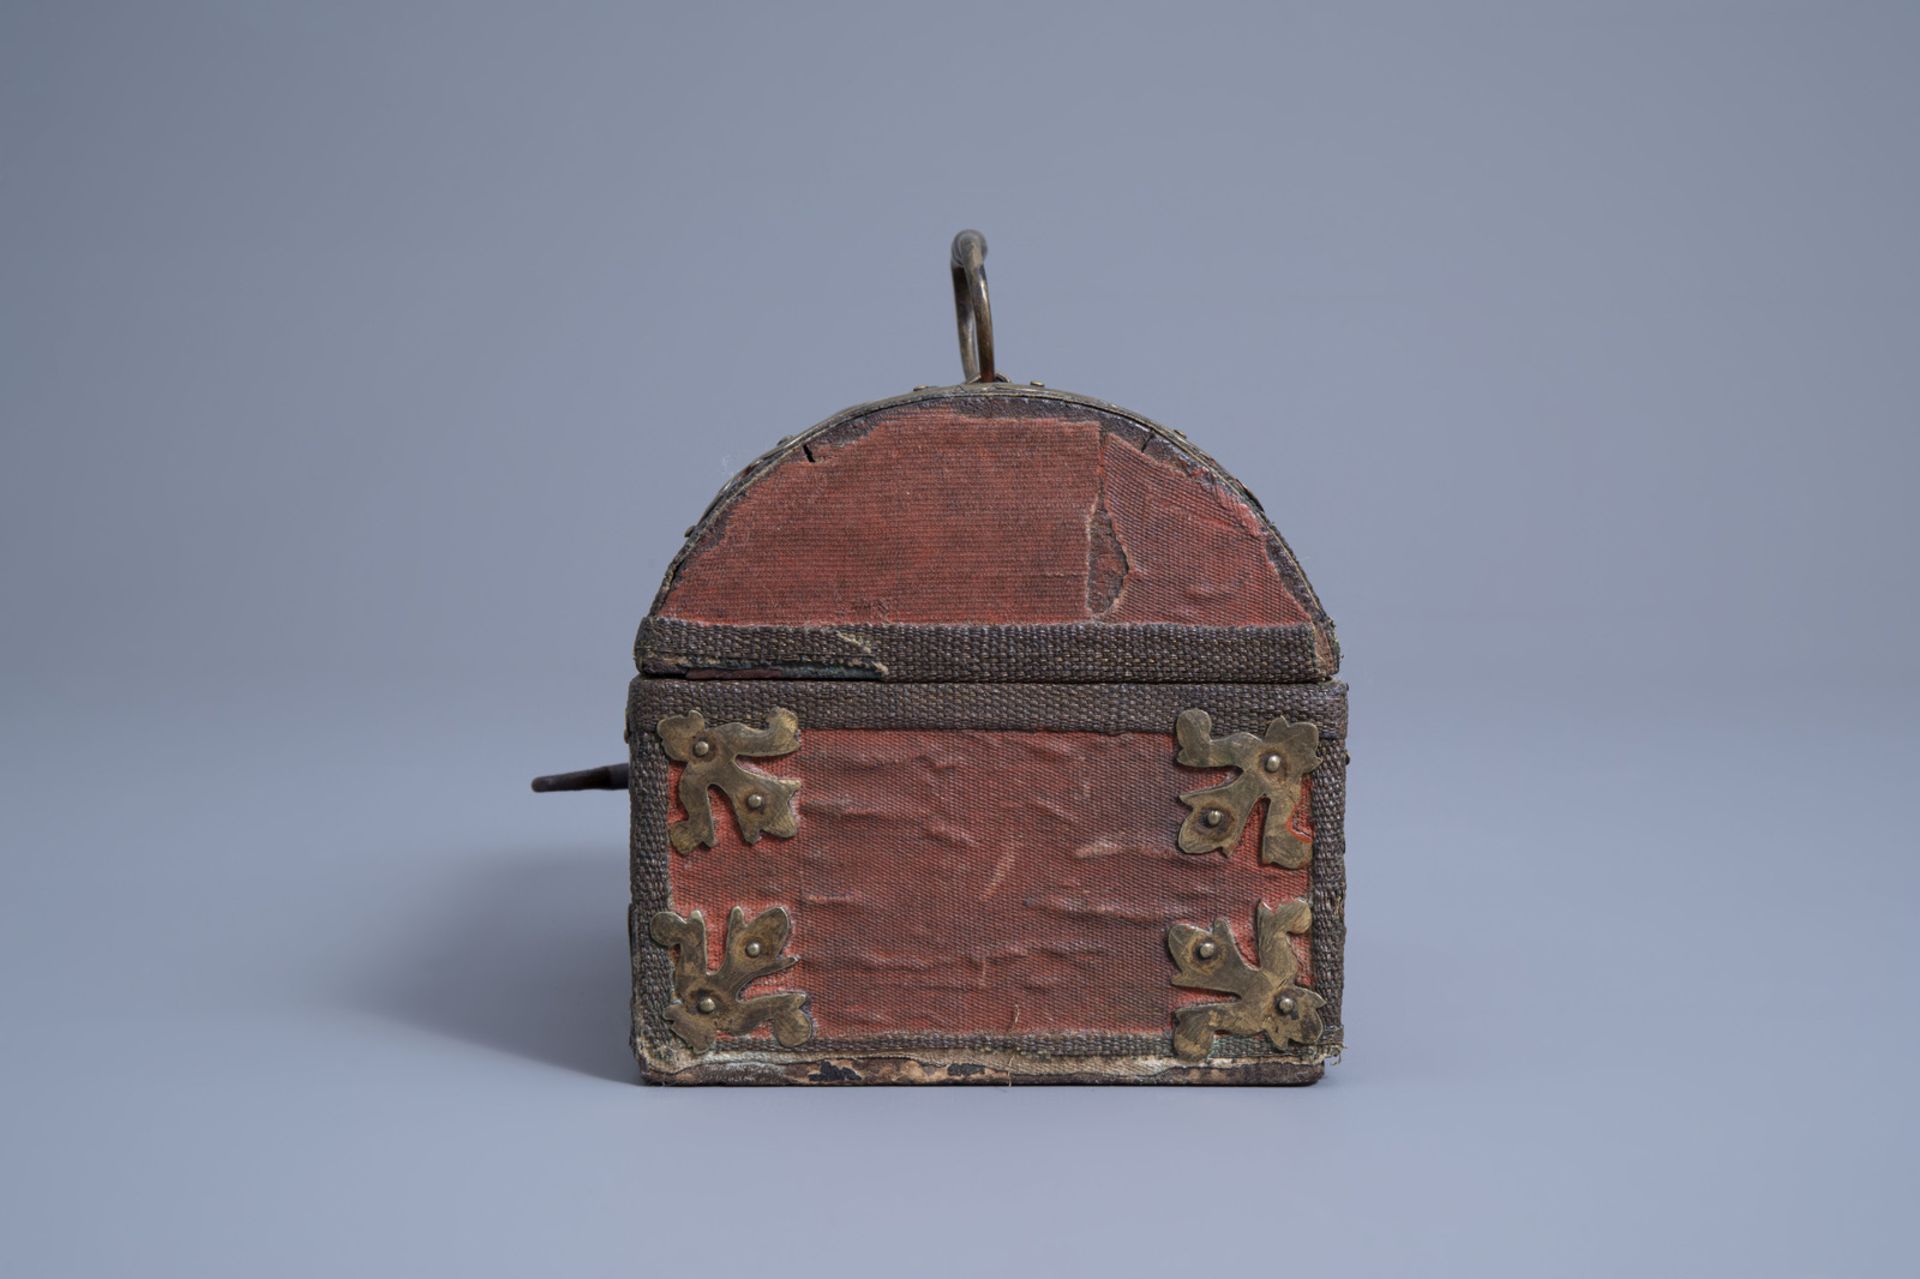 A French brass mounted and lined wooden jewelry or valuables box, 18th C. - Image 5 of 8